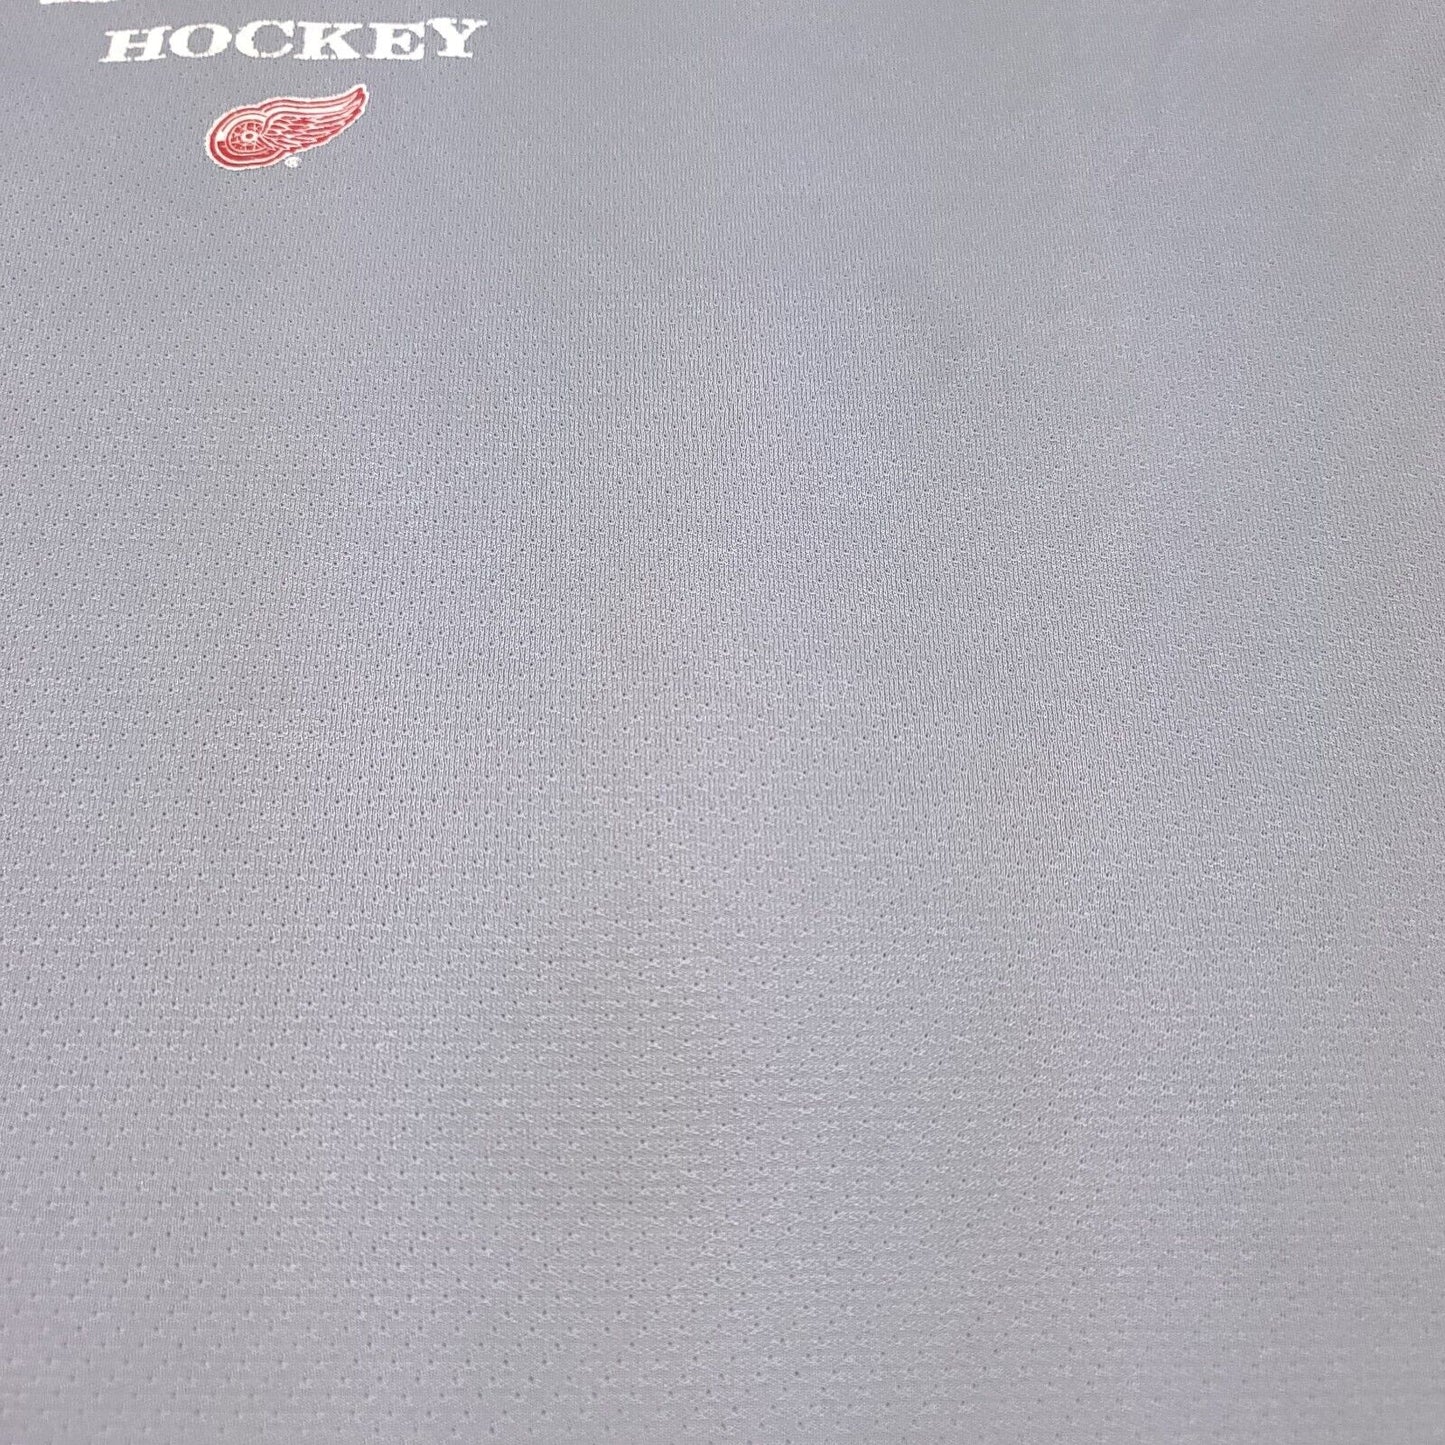 Detroit Red Wings Nhl Gray CCM Hockey Jersey